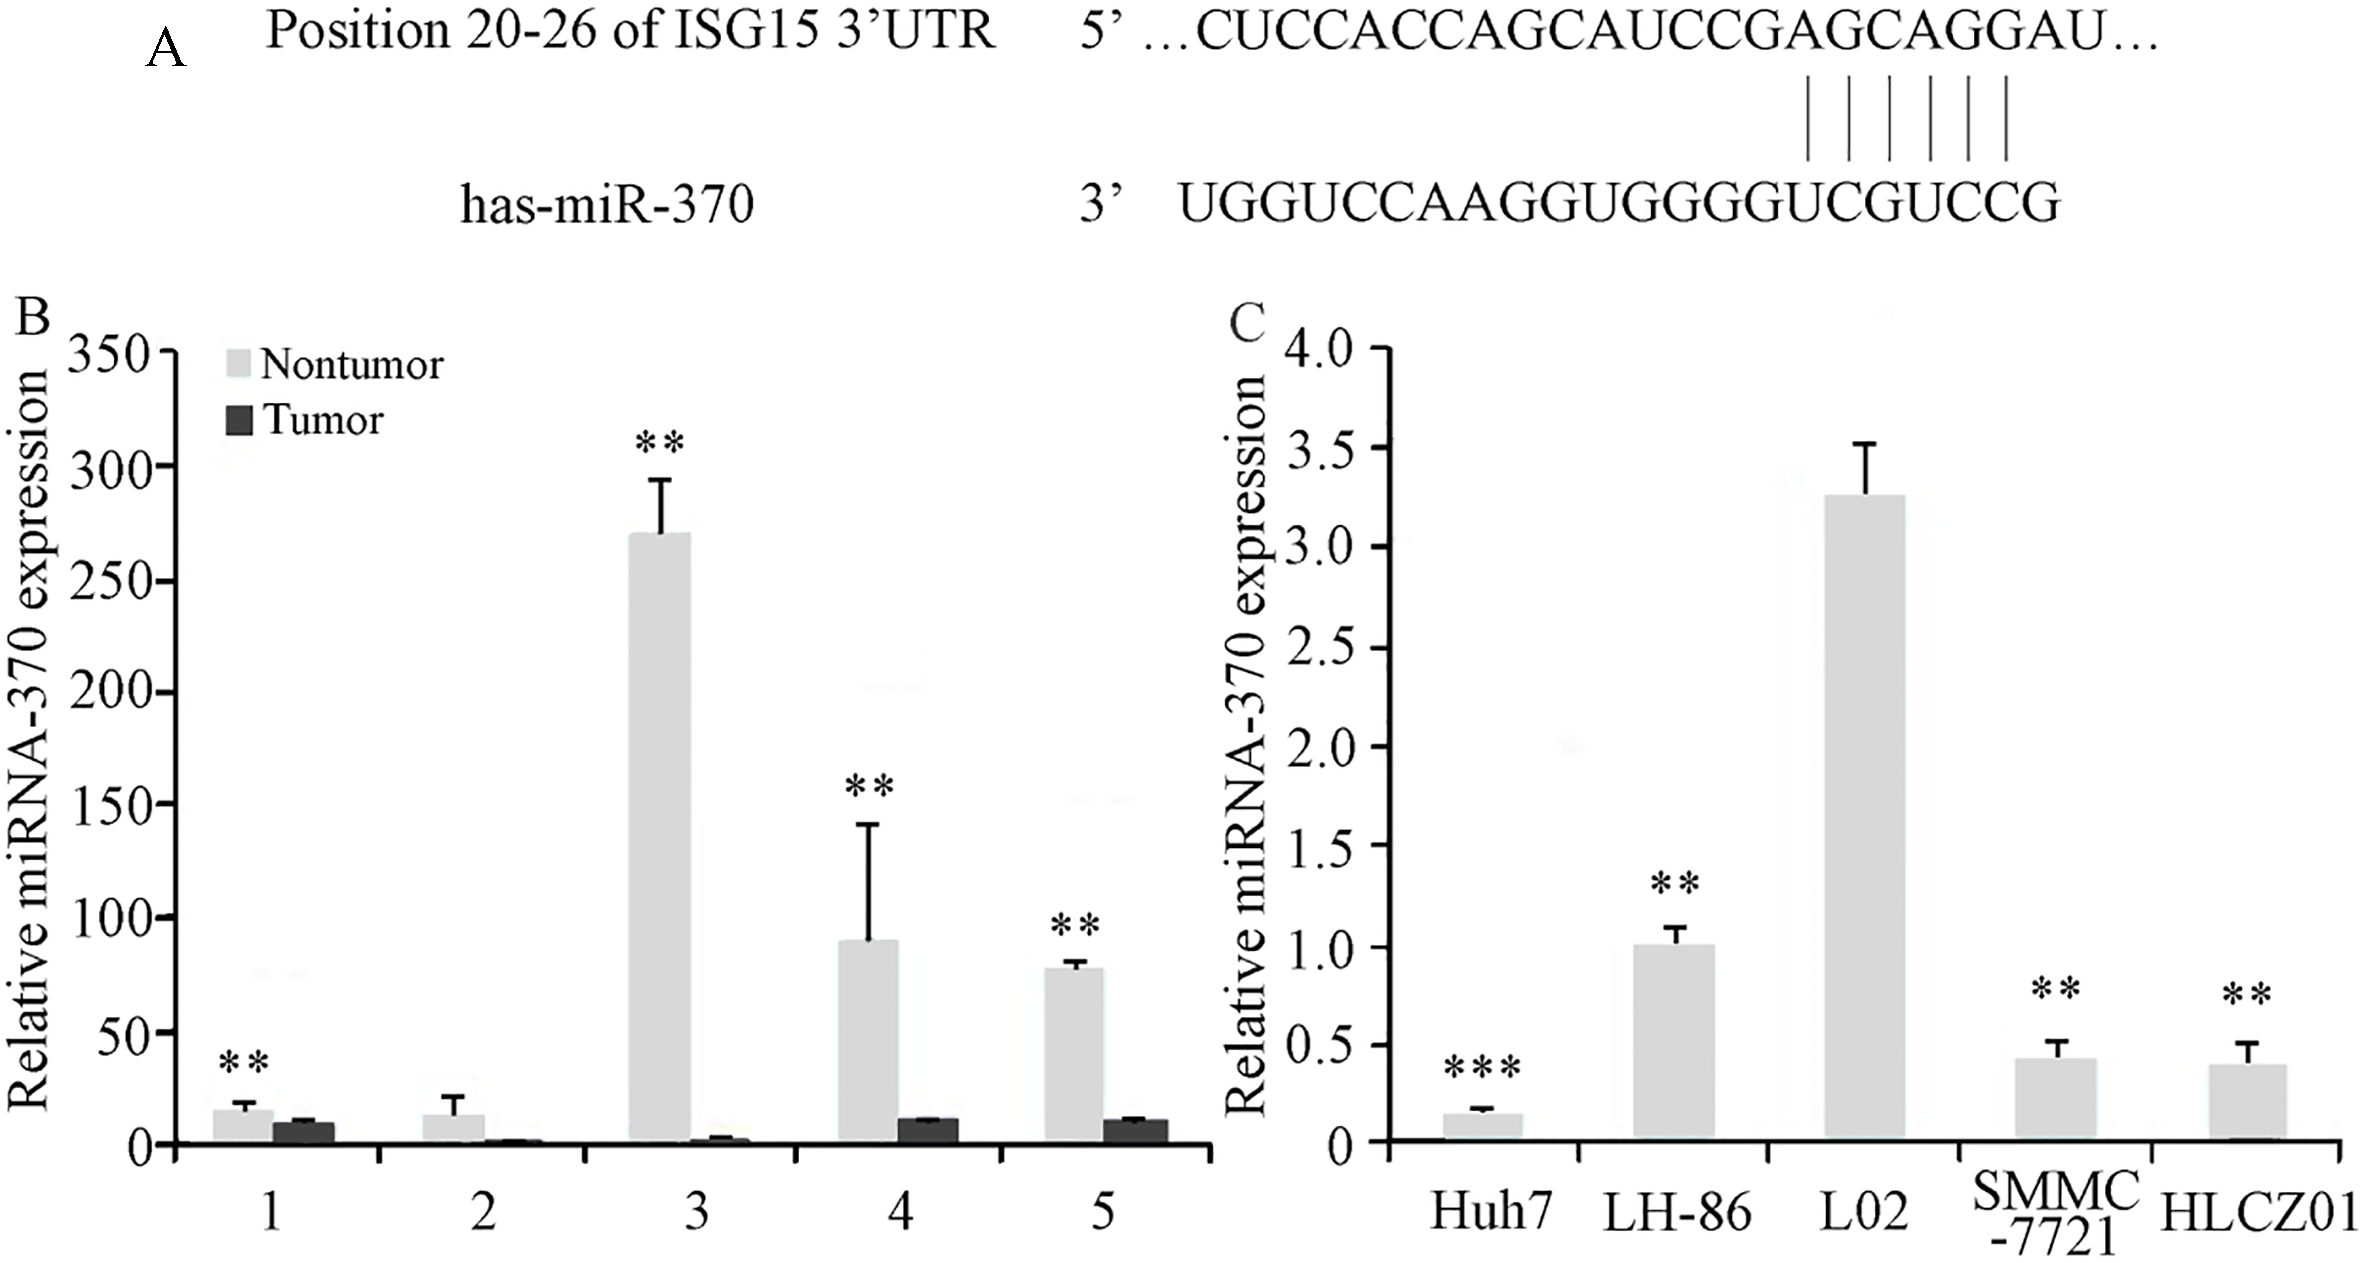 Identification of miR-370 target sequence in ISG15 mRNA, and analysis of miR-370 expression in HCC tumor tissues and cell lines. (A) The 3′-UTR of ISG15 mRNA contains one predicted miR-370 binding site, as indicated in the alignment of the seed region of miR-370 with ISG15 3′-UTR sequence. Relative quantification of the level of miR-370 in (B) HCC tumor samples (**P< 0.01 compared to adjacent noncancerous tissues) and (C) HCC cell lines (**P< 0.05 and *P< 0.05 compared with LO2 and LH86 cells, respectively) was performed using qRT-PCR, and the results were normalized based on U6 expression. The data presented are representative of 3 independent experiments.